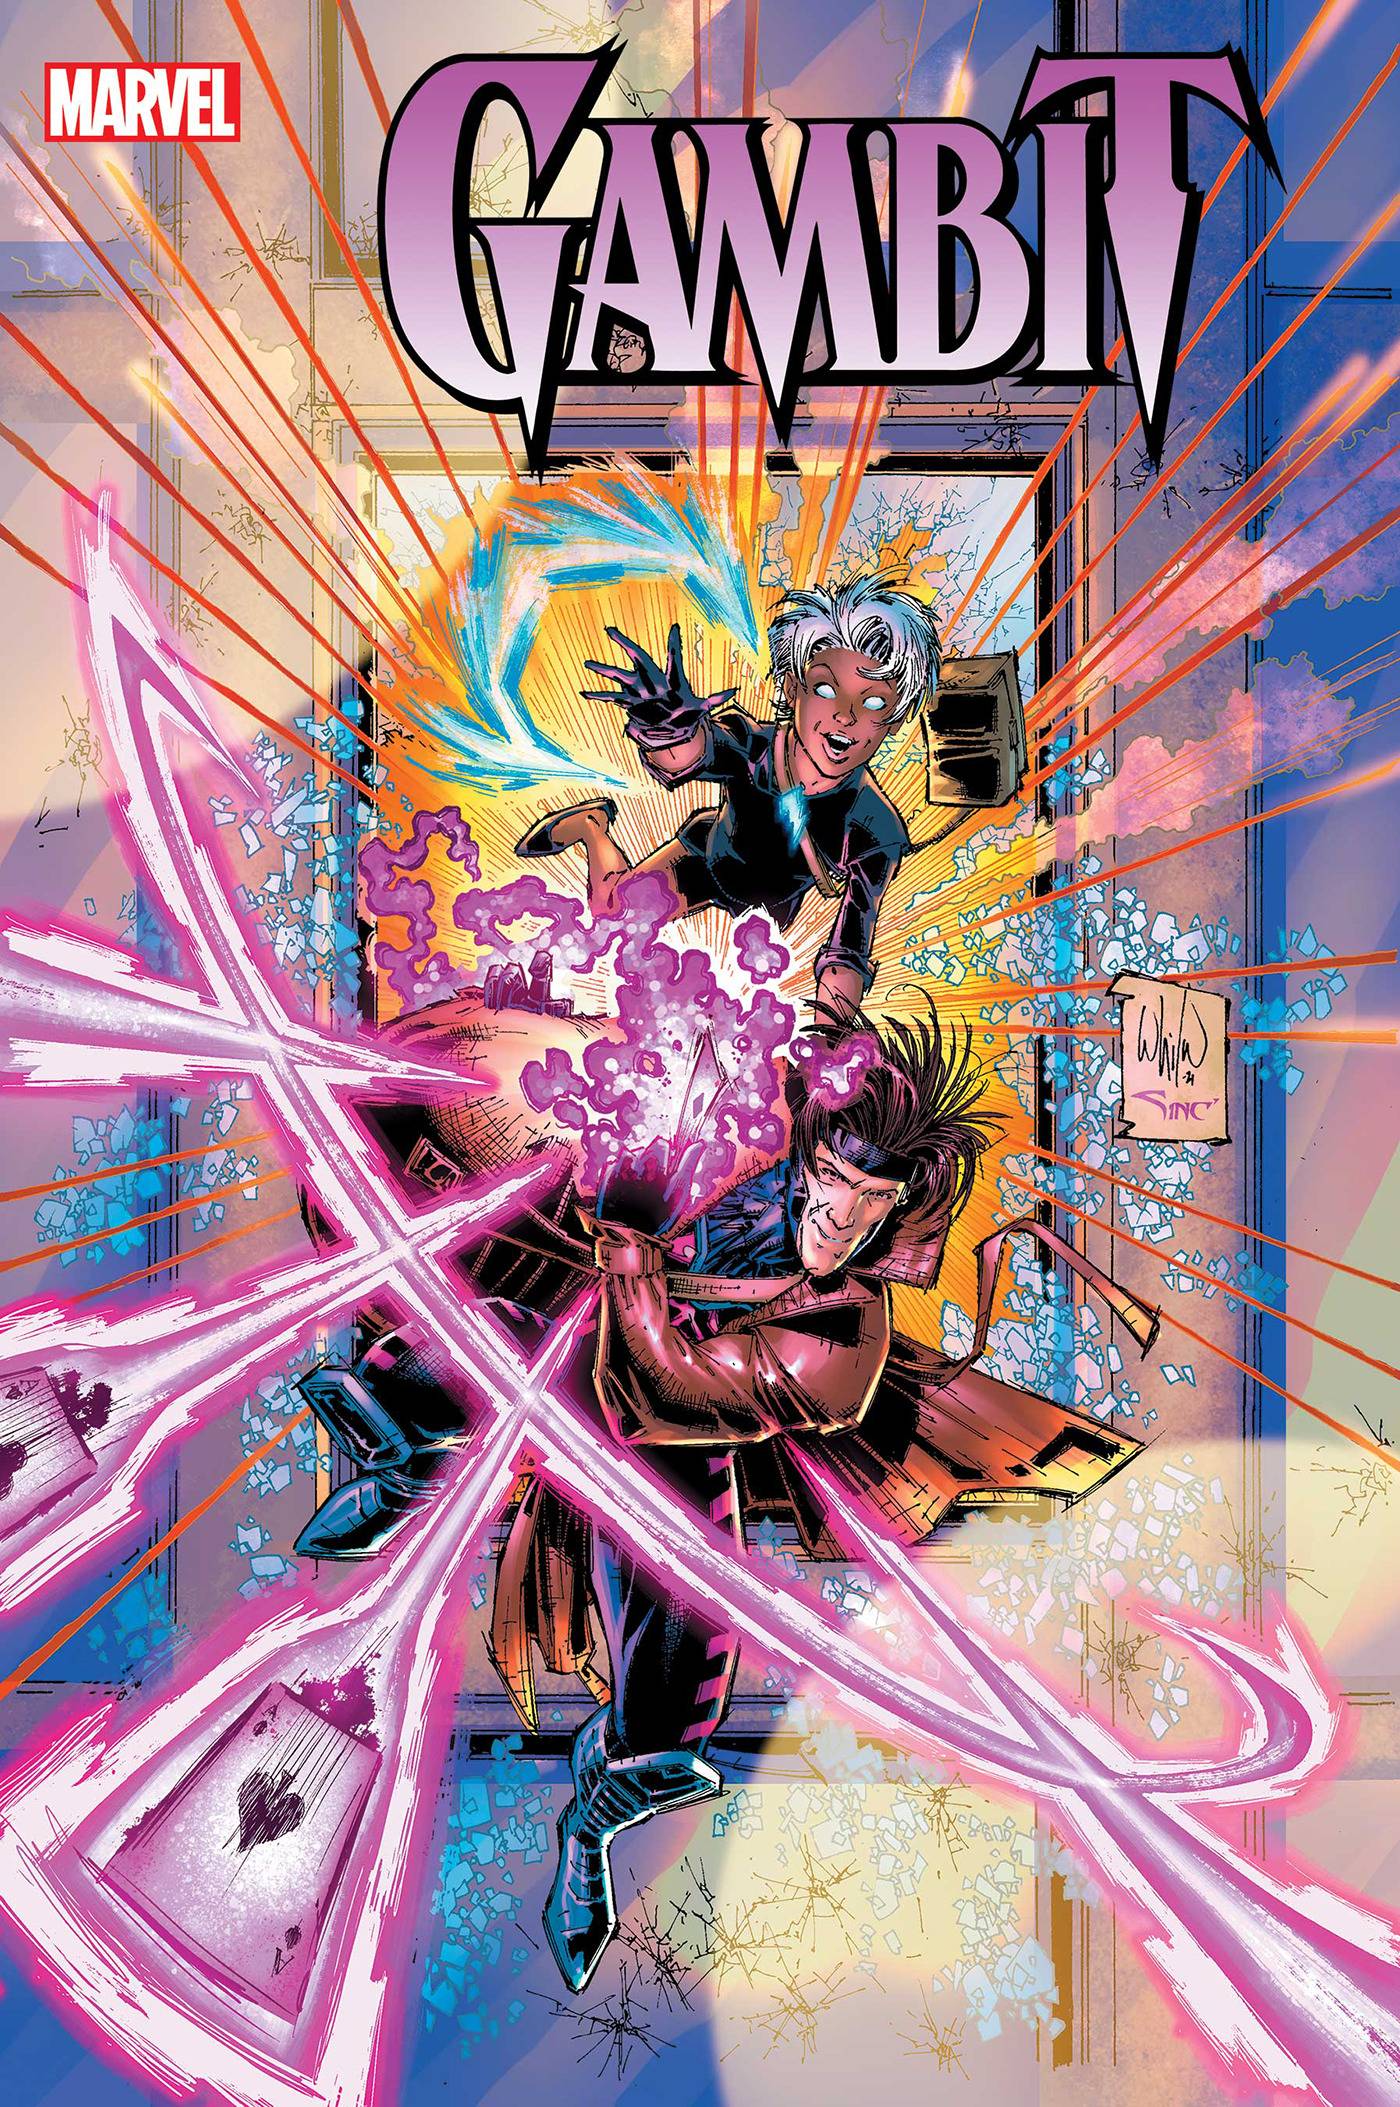 GAMBIT #1 POSTER (O/A)